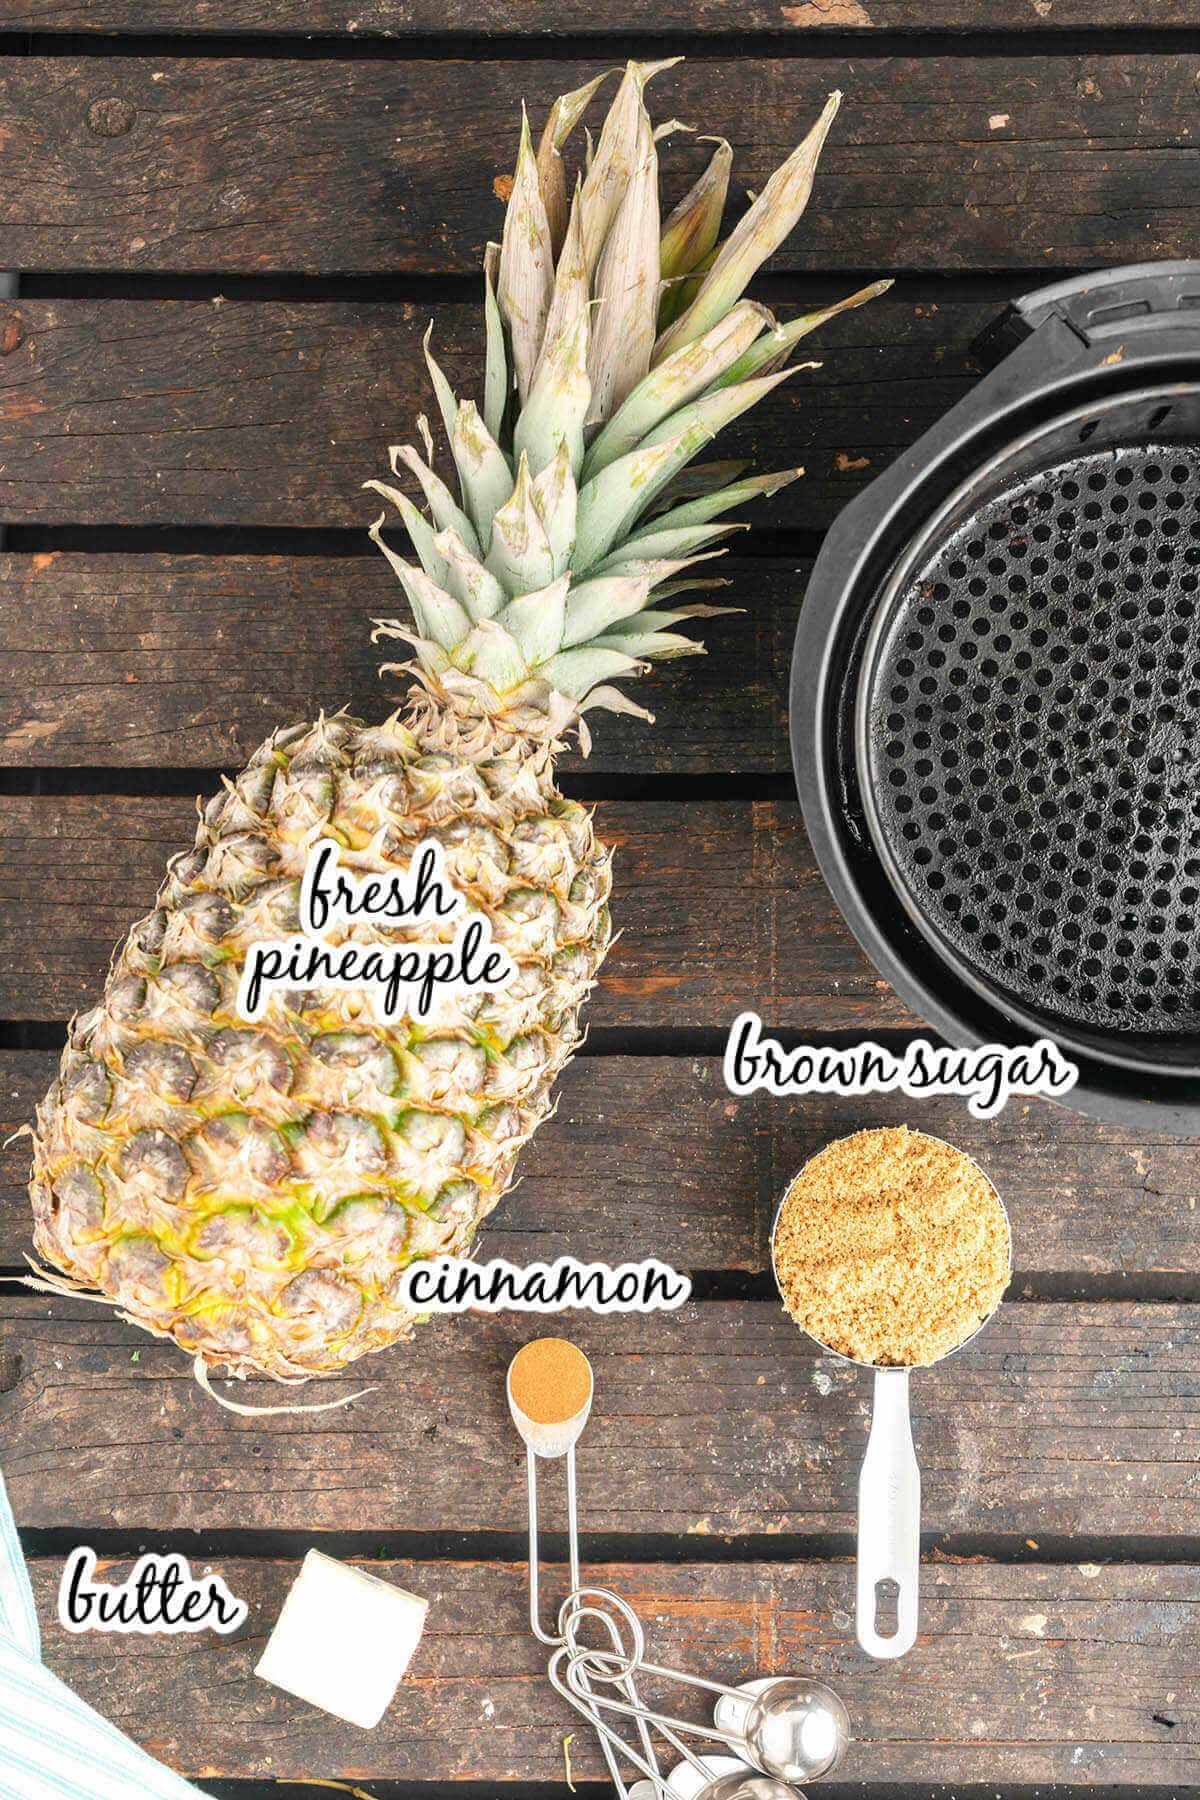 Ingredients to make pineapple air fryer recipe. With print overlay. 